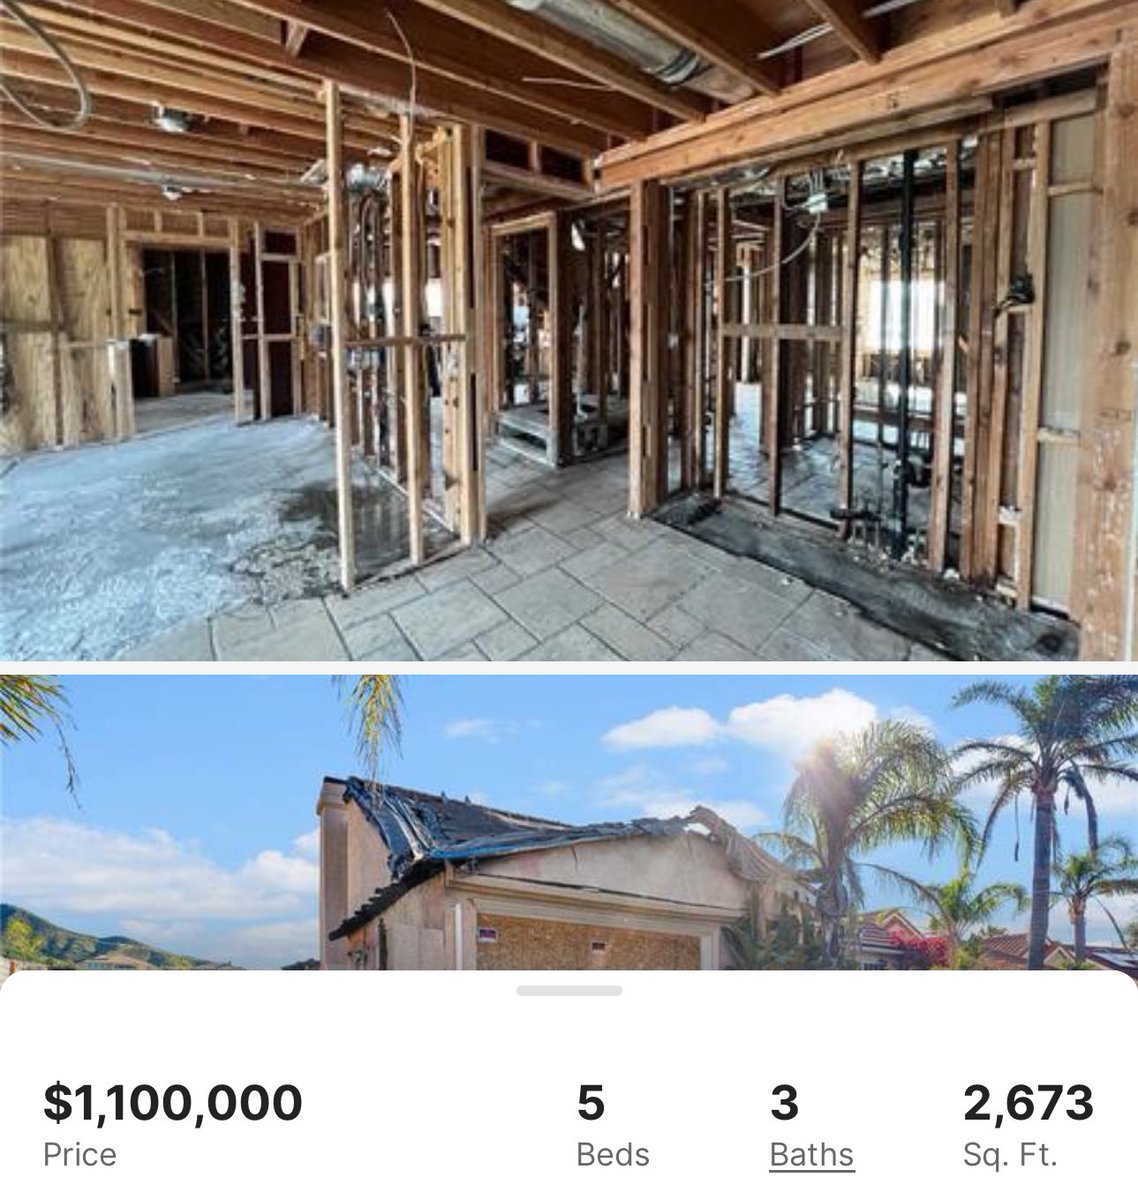 LA realtors are sneaky. Check out the photo progression of this listing 😂